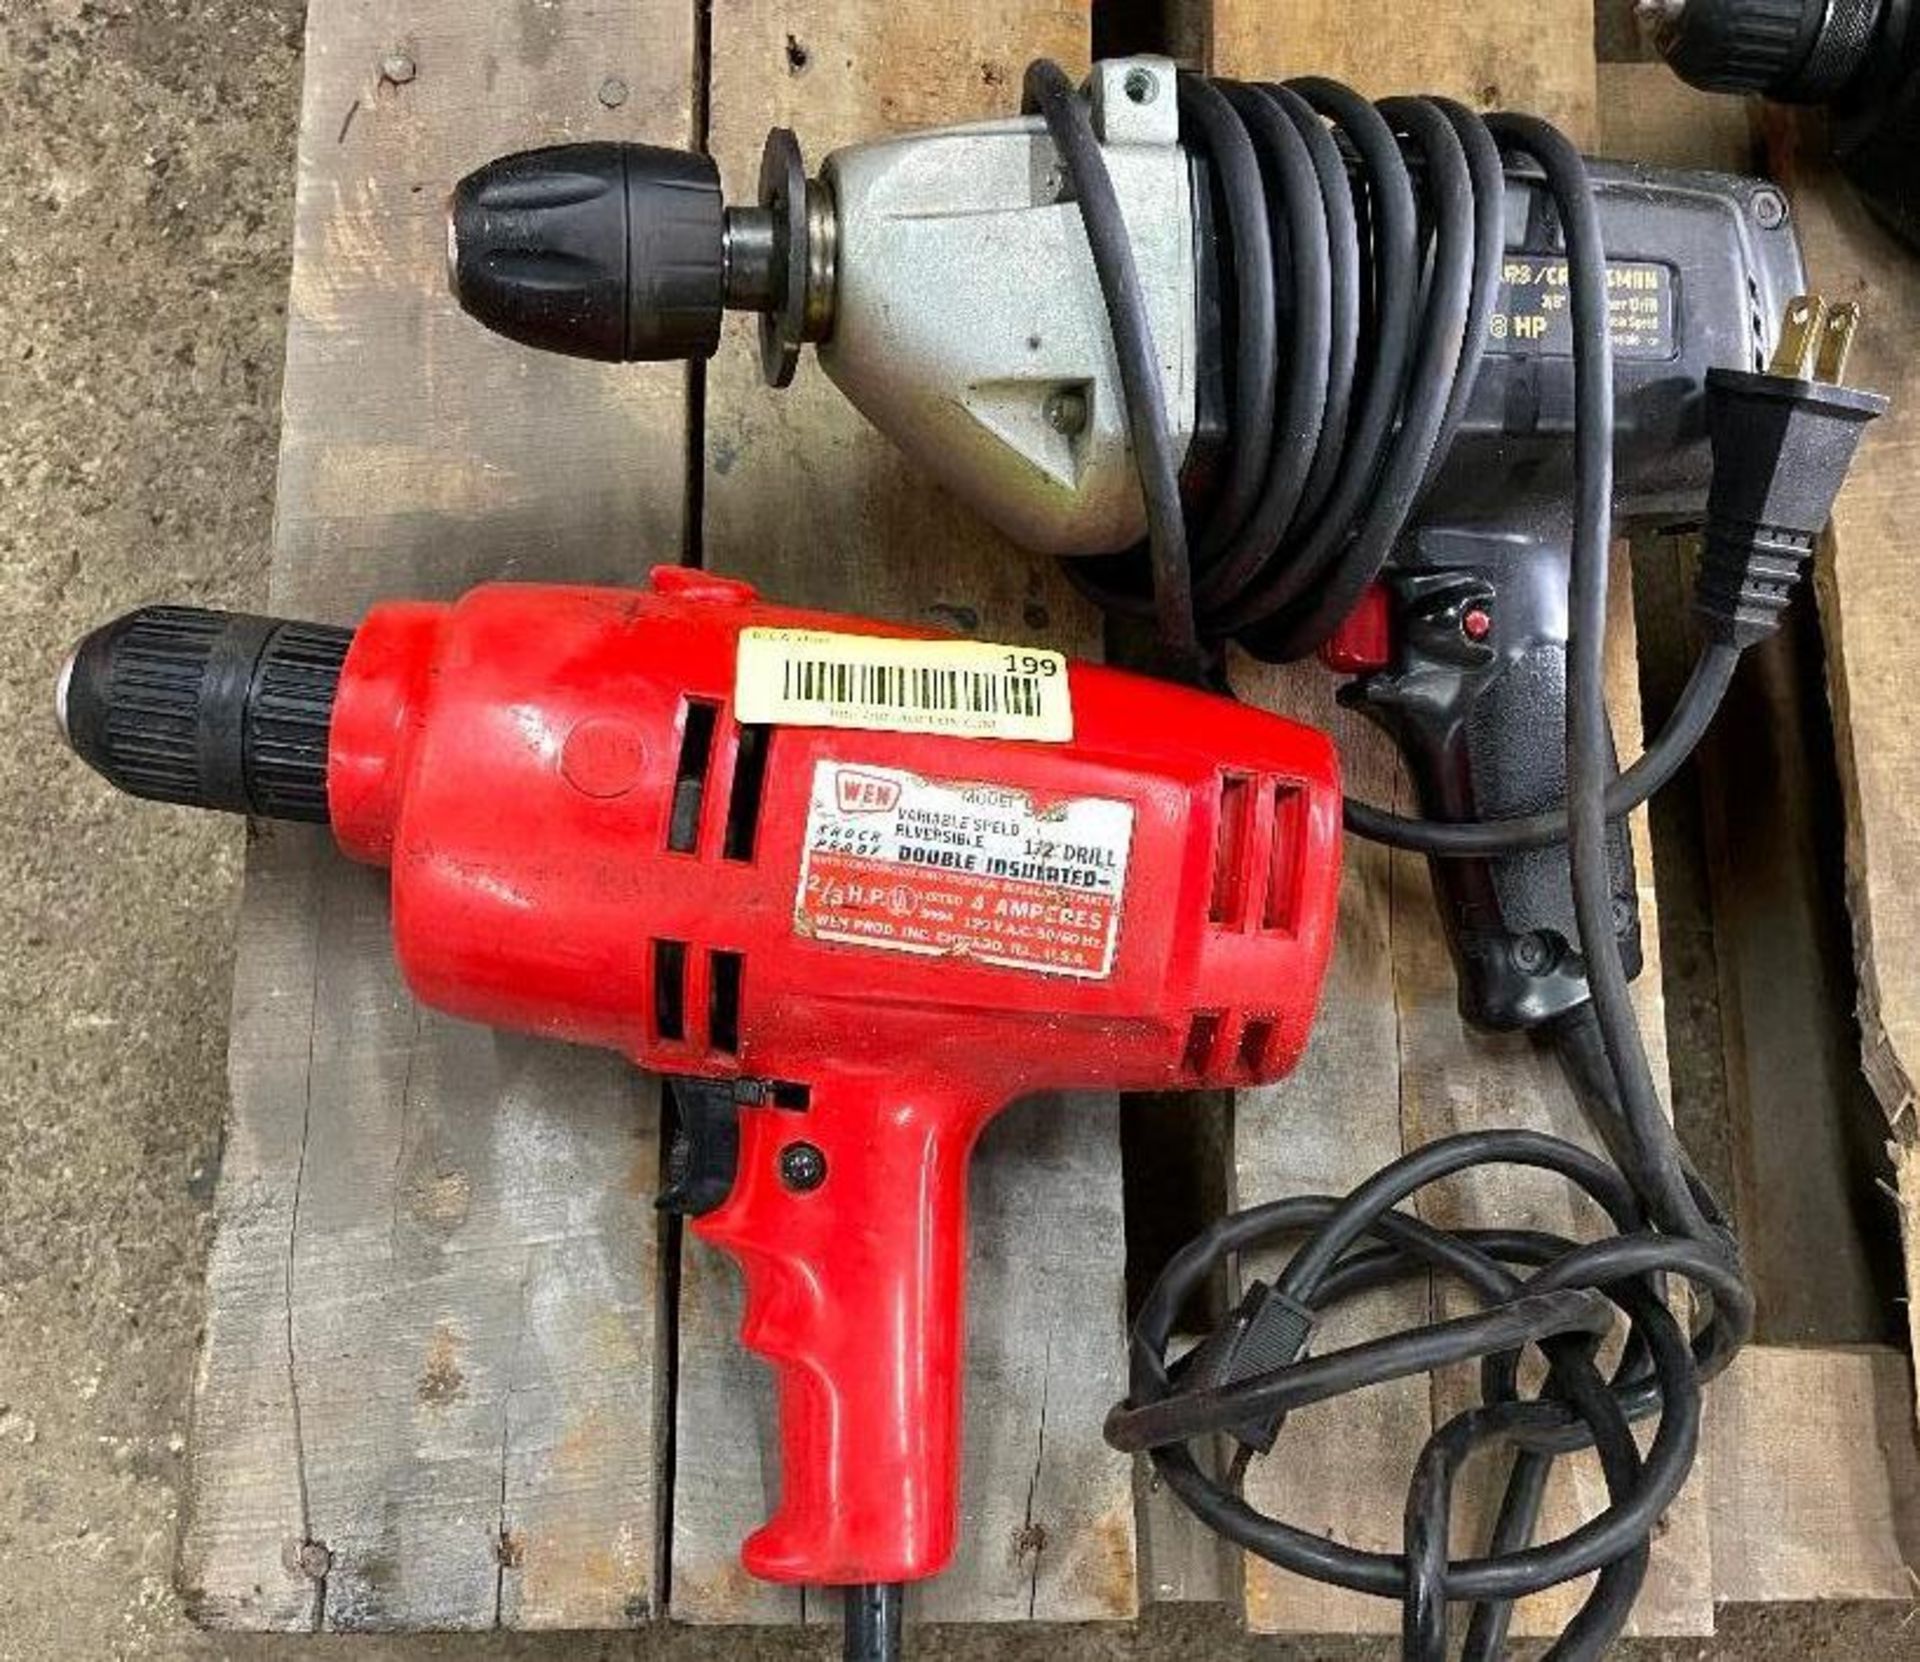 DESCRIPTION: (2) ASSORTED ELECTRIC DRILLS - IN WORKING ORDER. LOCATION: SHOP THIS LOT IS: ONE MONEY